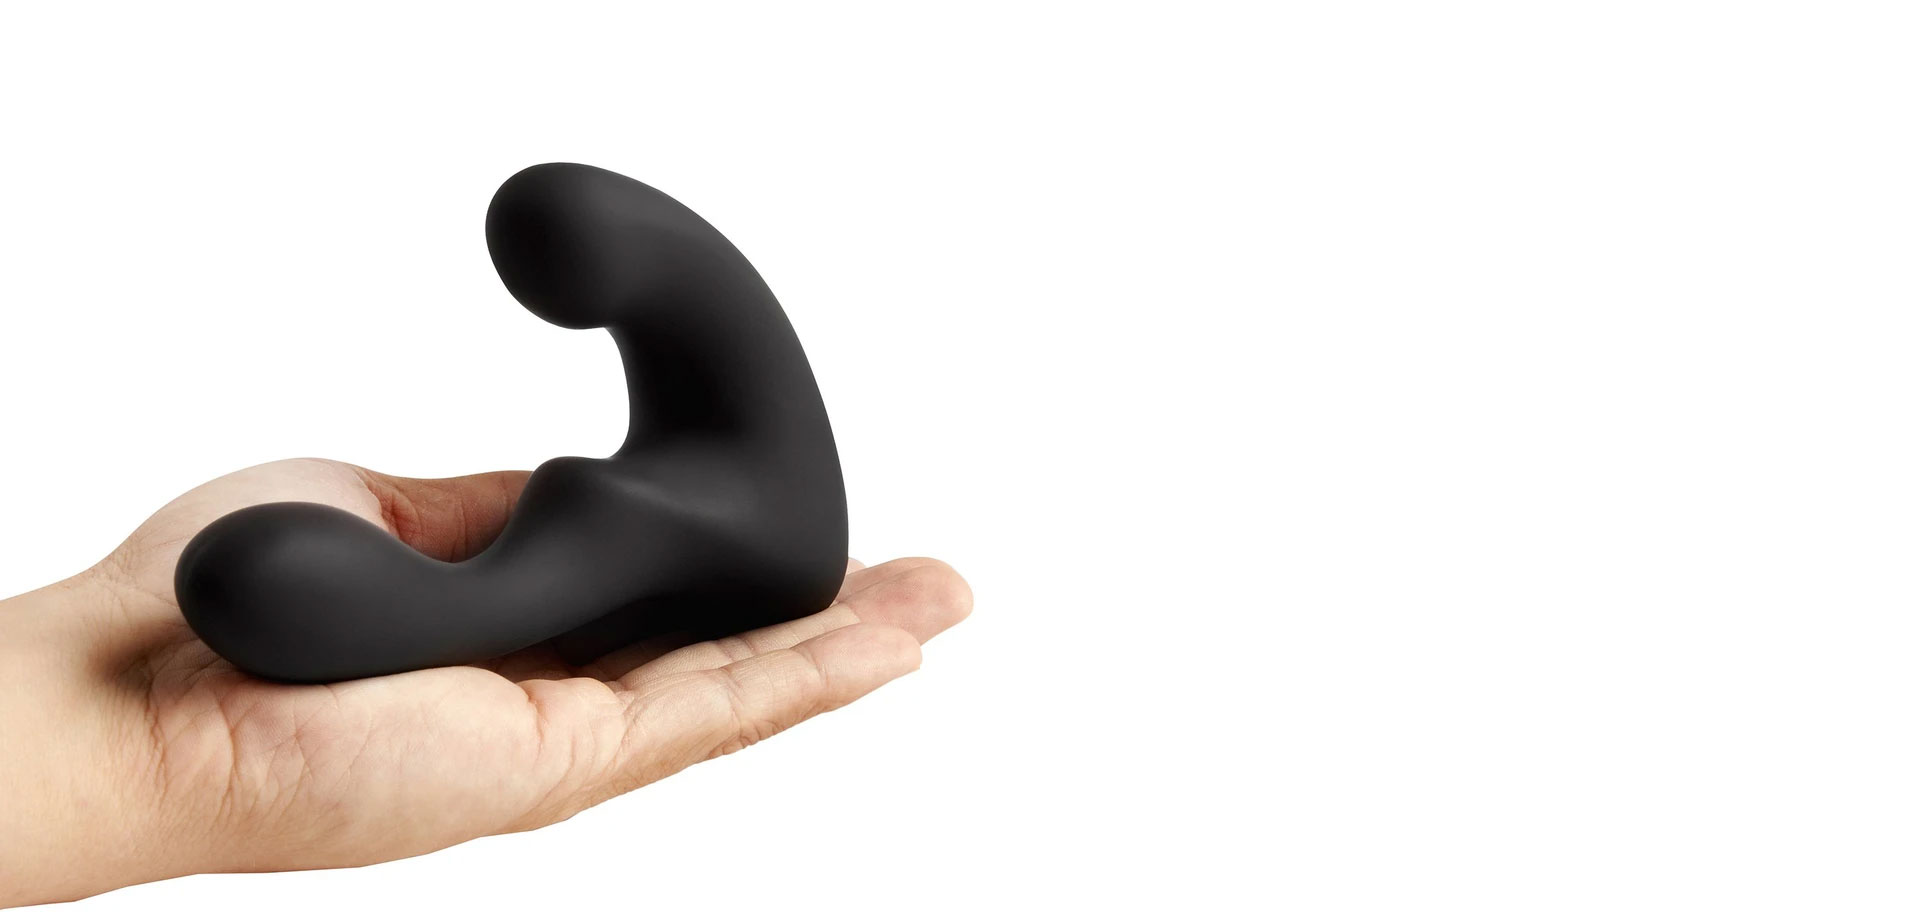 Tomo II remote controlled prostate massager.